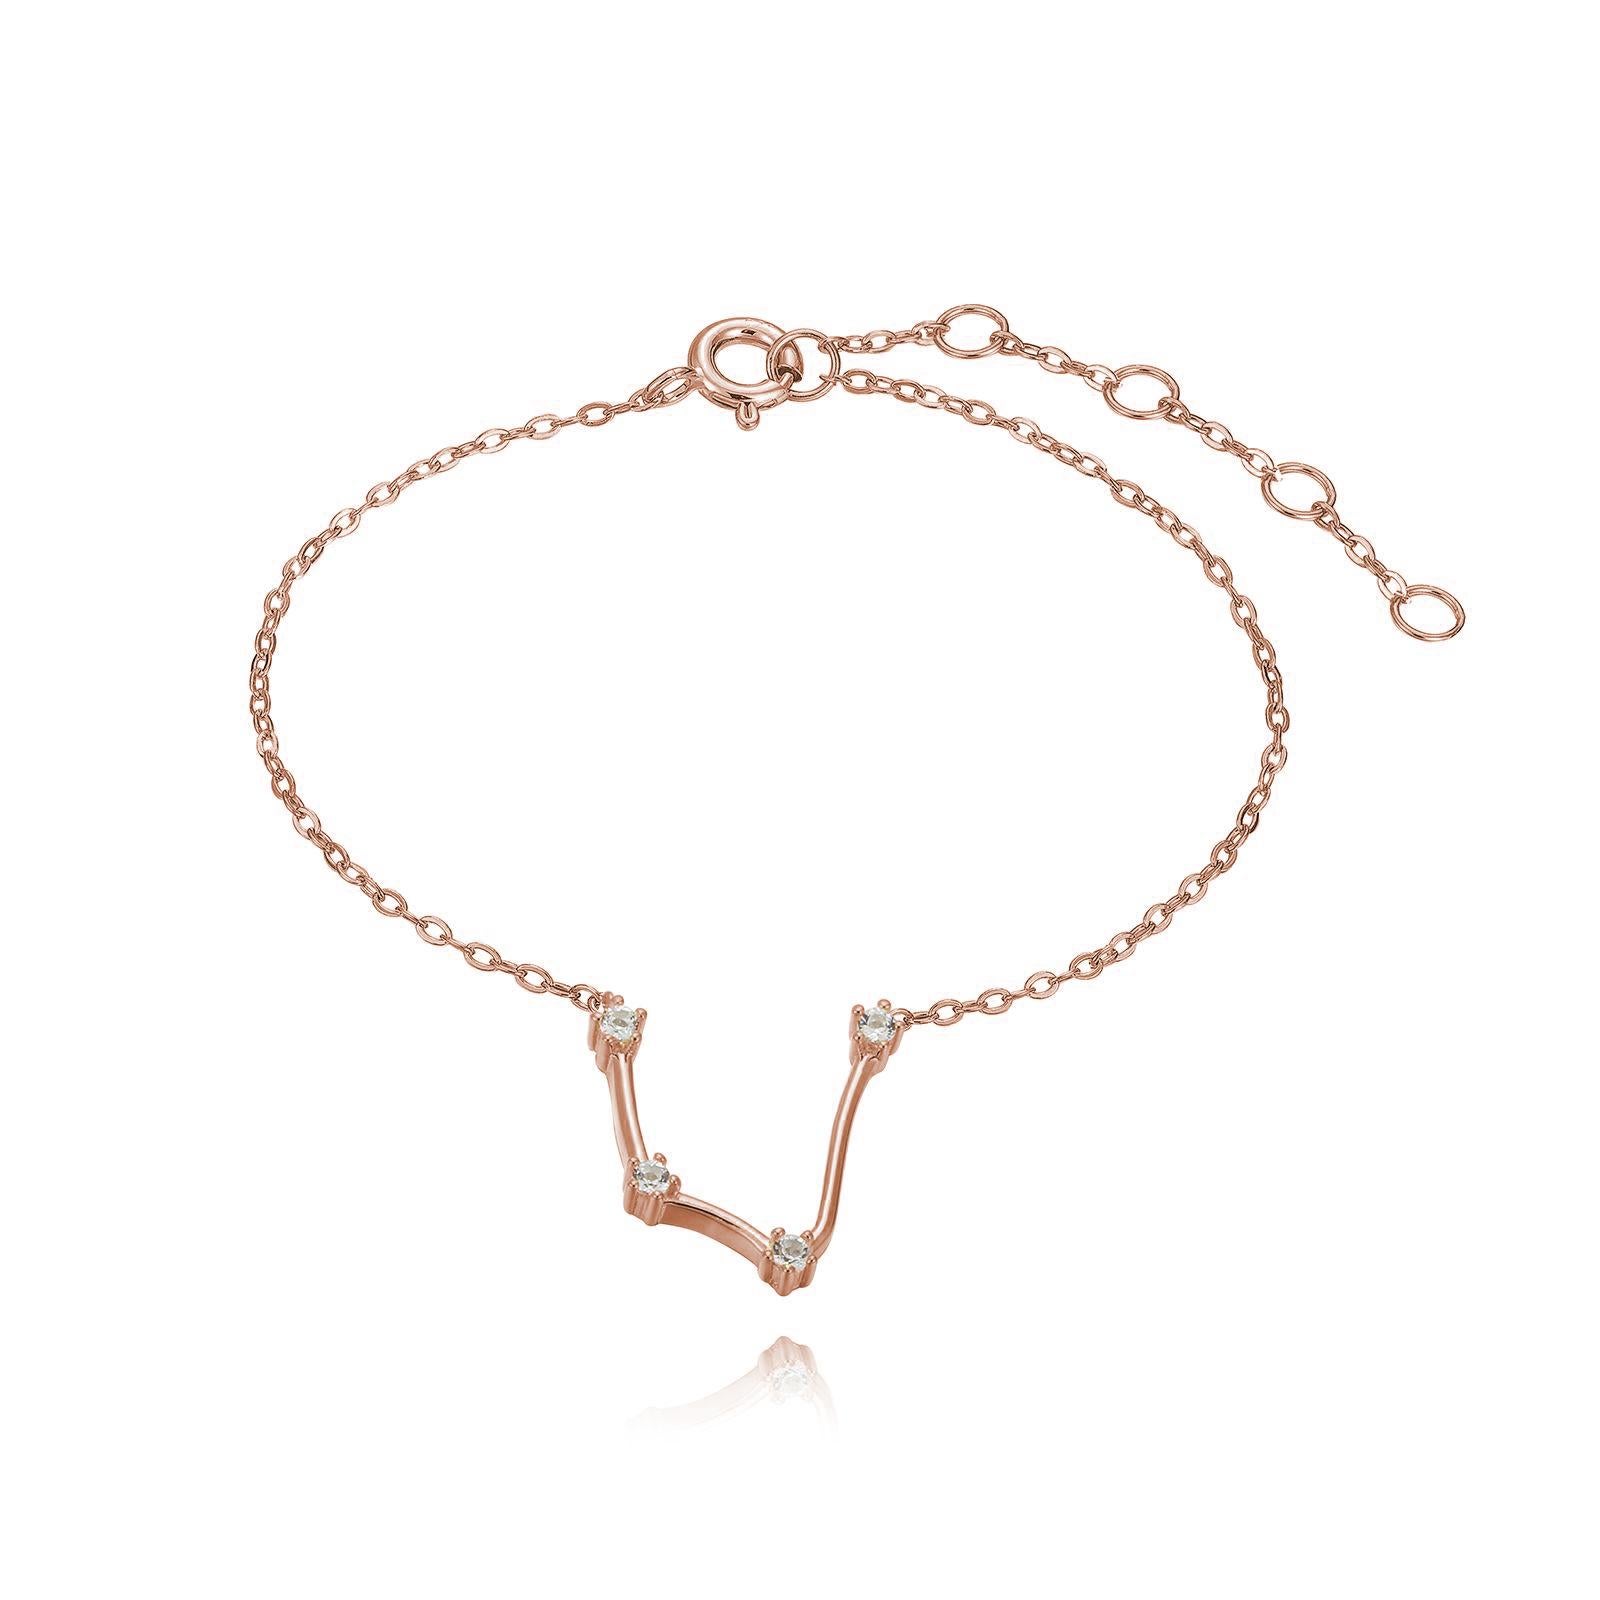 You are unique and your zodiac tells part of your story.  How your zodiac is displayed in the beautiful nighttime sky is what we want you to carry with you always. This aquarius constellation anklet shares a part of your personality with us all 